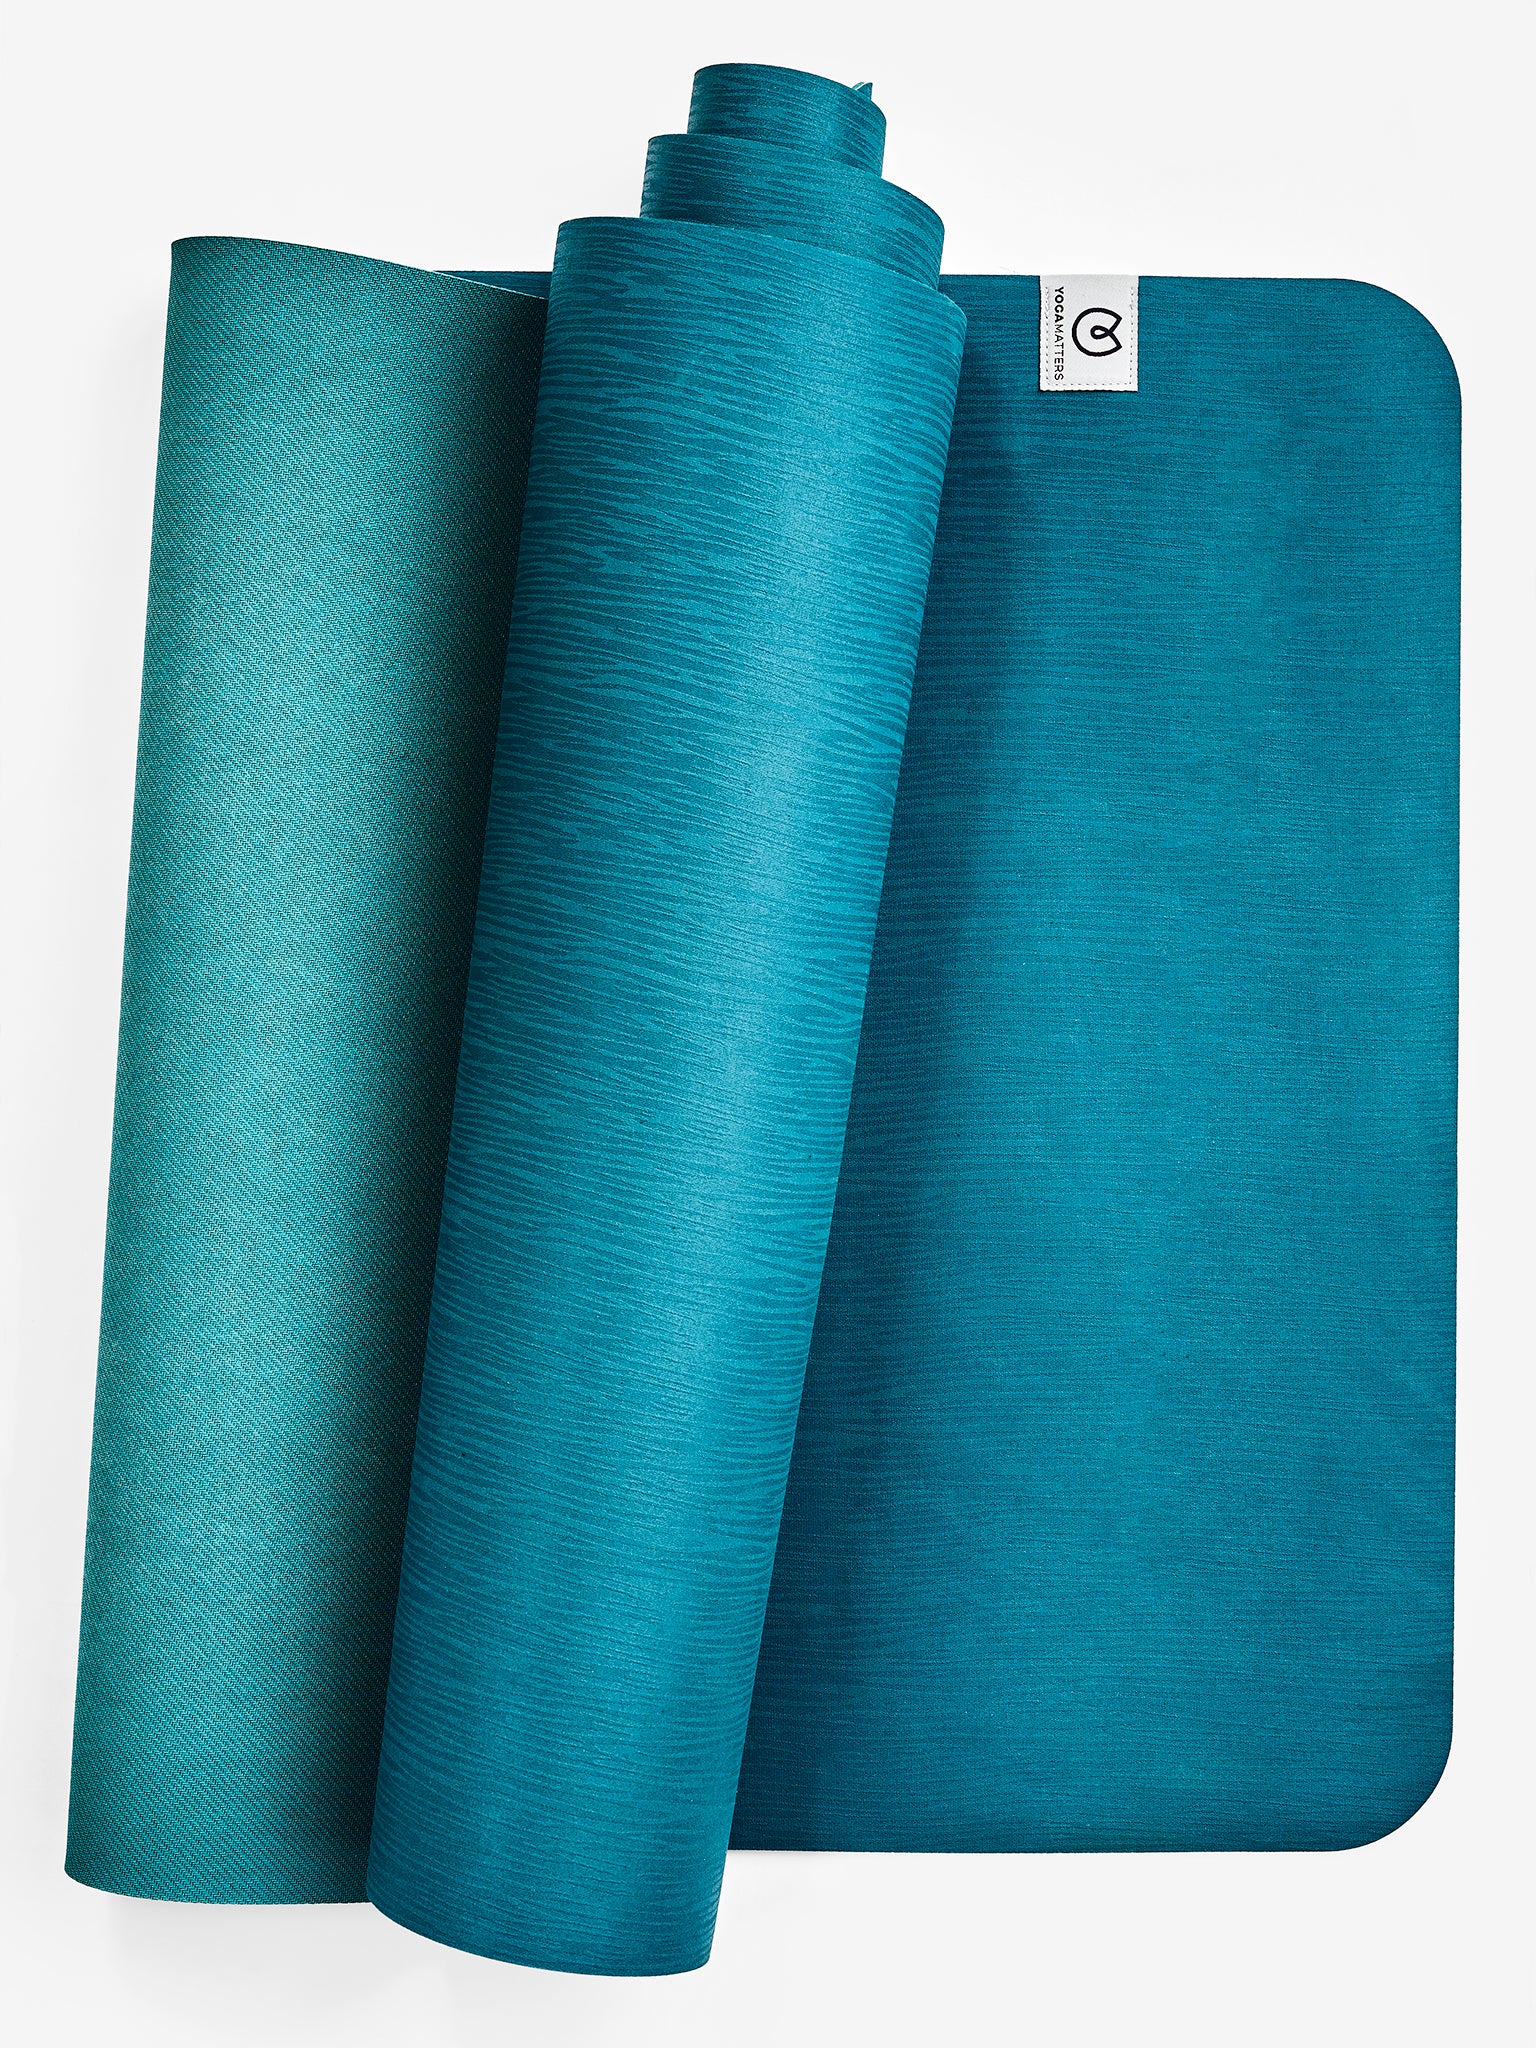 Anthropologie Live Mindfully Travel Yoga Mat - NEW in package. Blue/purple.